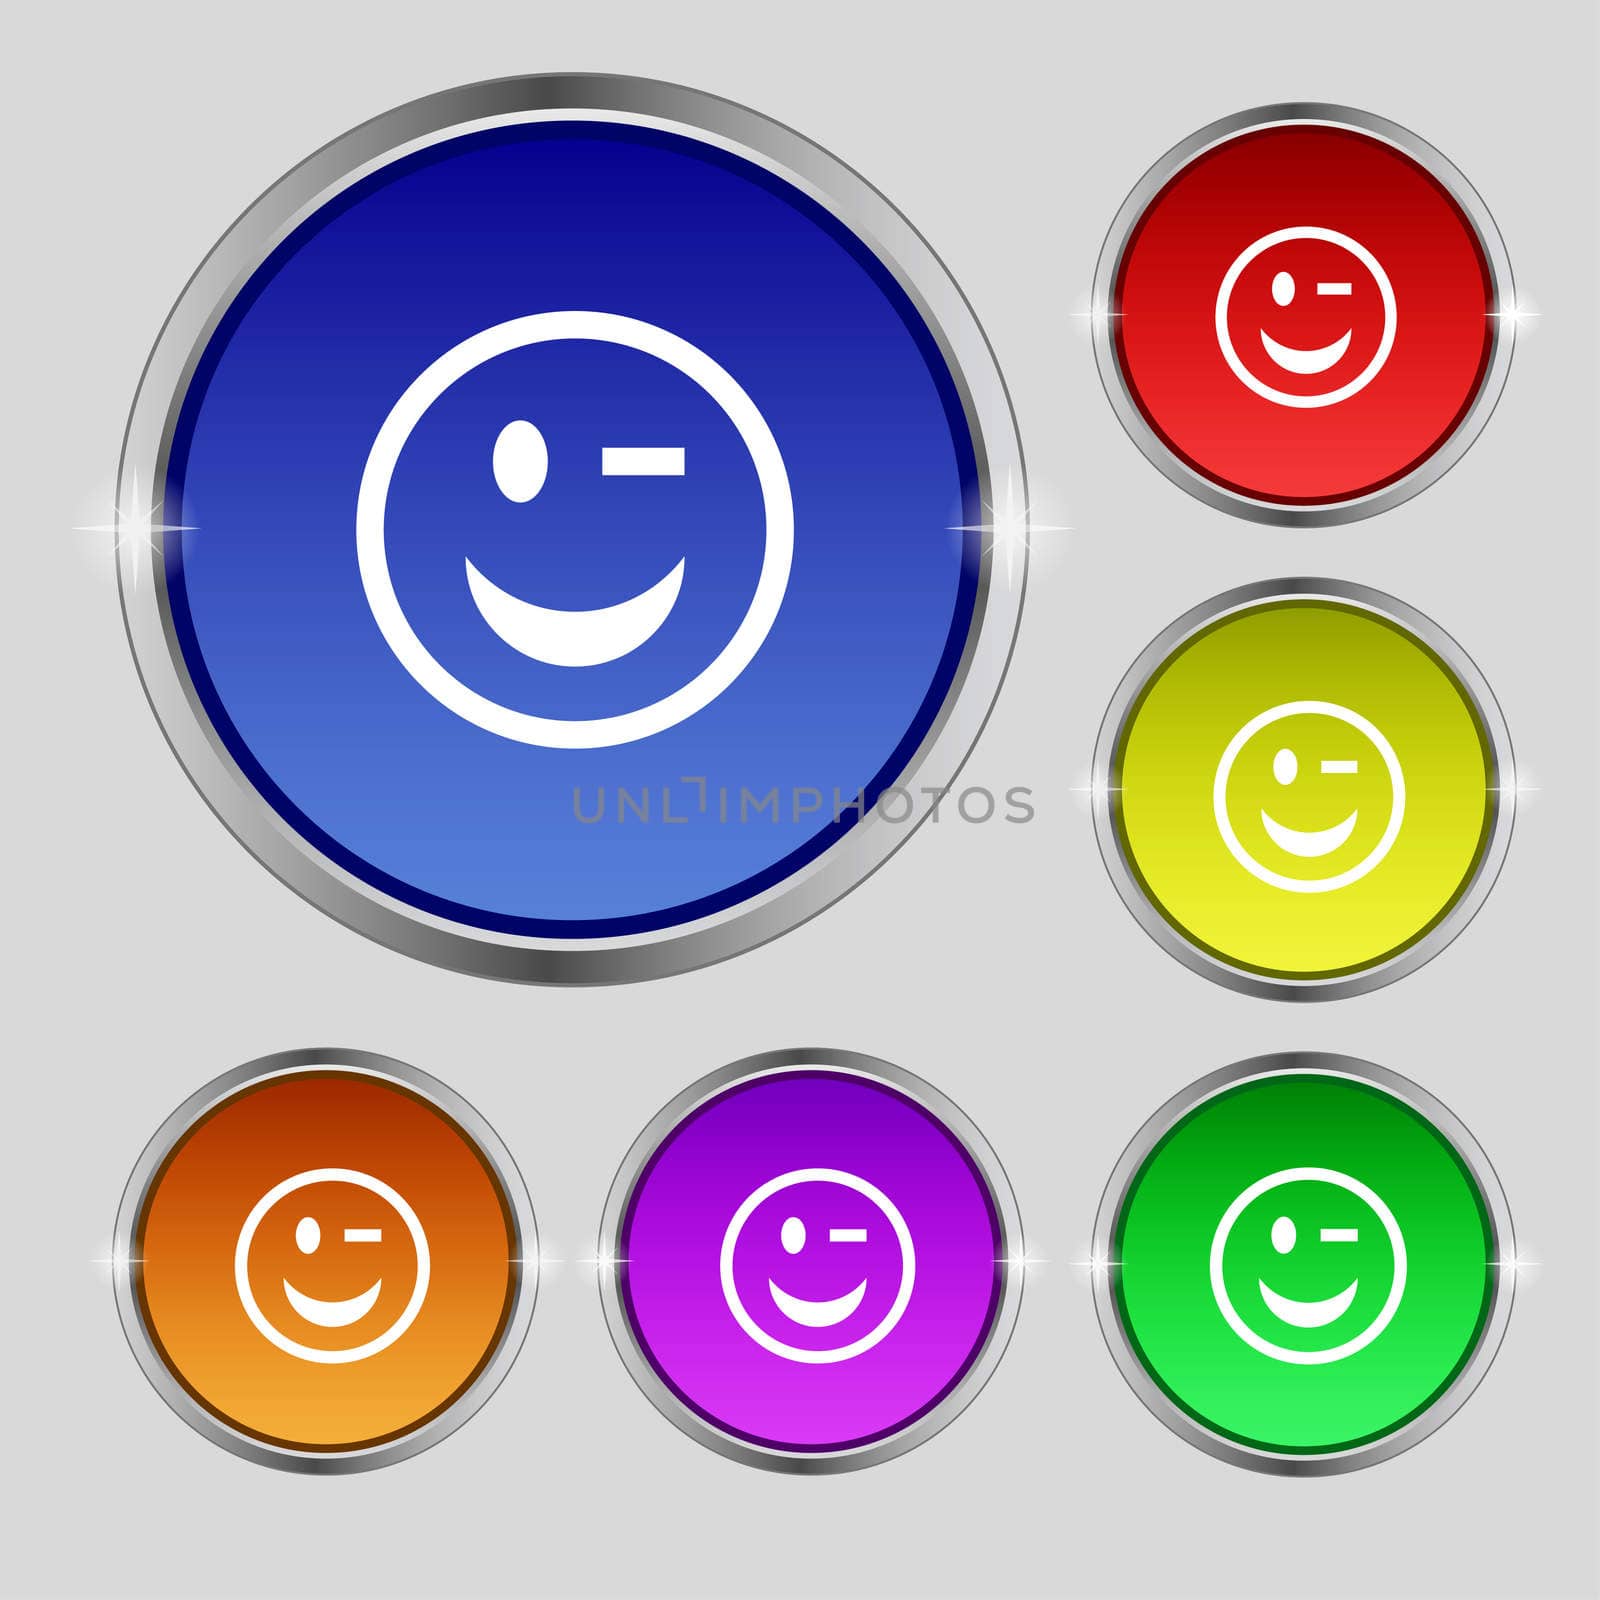 Winking Face icon sign. Round symbol on bright colourful buttons. illustration